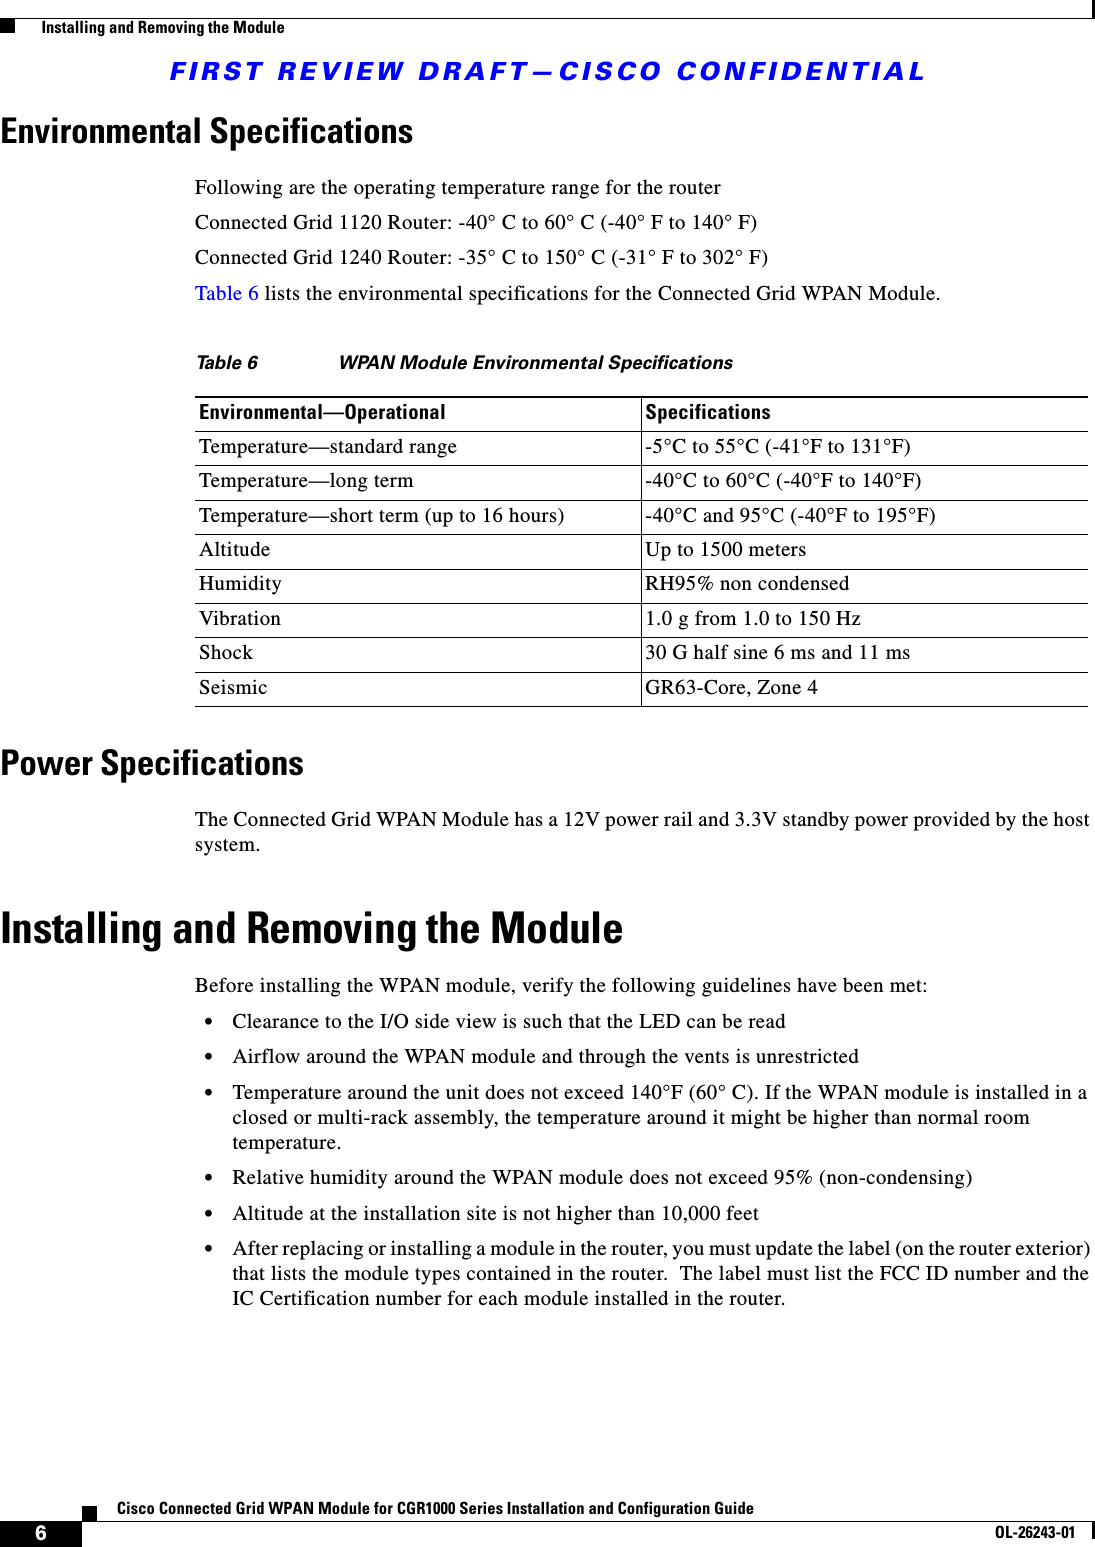 FIRST REVIEW DRAFT—CISCO CONFIDENTIAL6Cisco Connected Grid WPAN Module for CGR1000 Series Installation and Configuration GuideOL-26243-01  Installing and Removing the ModuleEnvironmental SpecificationsFollowing are the operating temperature range for the routerConnected Grid 1120 Router: -40° C to 60° C (-40° F to 140° F)Connected Grid 1240 Router: -35° C to 150° C (-31° F to 302° F)Table 6 lists the environmental specifications for the Connected Grid WPAN Module.Power SpecificationsThe Connected Grid WPAN Module has a 12V power rail and 3.3V standby power provided by the host system. Installing and Removing the ModuleBefore installing the WPAN module, verify the following guidelines have been met:  • Clearance to the I/O side view is such that the LED can be read  • Airflow around the WPAN module and through the vents is unrestricted  • Temperature around the unit does not exceed 140°F (60° C). If the WPAN module is installed in a closed or multi-rack assembly, the temperature around it might be higher than normal room temperature.  • Relative humidity around the WPAN module does not exceed 95% (non-condensing)  • Altitude at the installation site is not higher than 10,000 feet  • After replacing or installing a module in the router, you must update the label (on the router exterior) that lists the module types contained in the router.  The label must list the FCC ID number and the IC Certification number for each module installed in the router.Ta b l e  6 WPAN Module Environmental SpecificationsEnvironmental—Operational SpecificationsTemperature—standard range -5°C to 55°C (-41°F to 131°F)Temperature—long term -40°C to 60°C (-40°F to 140°F)Temperature—short term (up to 16 hours) -40°C and 95°C (-40°F to 195°F)Altitude Up to 1500 metersHumidity RH95% non condensedVibration 1.0 g from 1.0 to 150 HzShock 30 G half sine 6 ms and 11 msSeismic GR63-Core, Zone 4